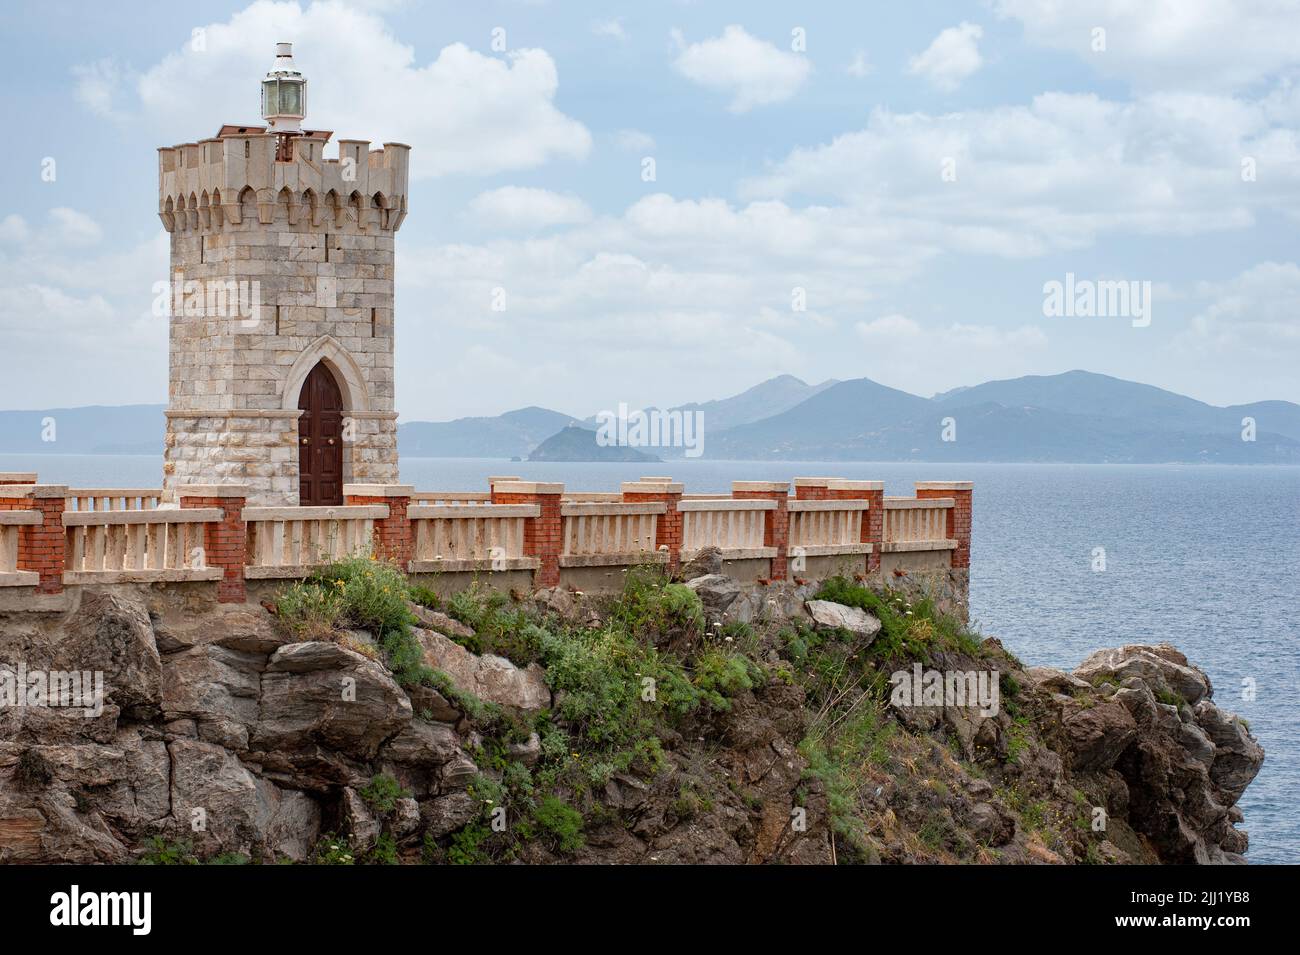 Piombino lighthouse (also known as Rocchetta lighthouse), it’s located on the natural terrace of Piazza Giovanni Bovio. Elba island in the background Stock Photo